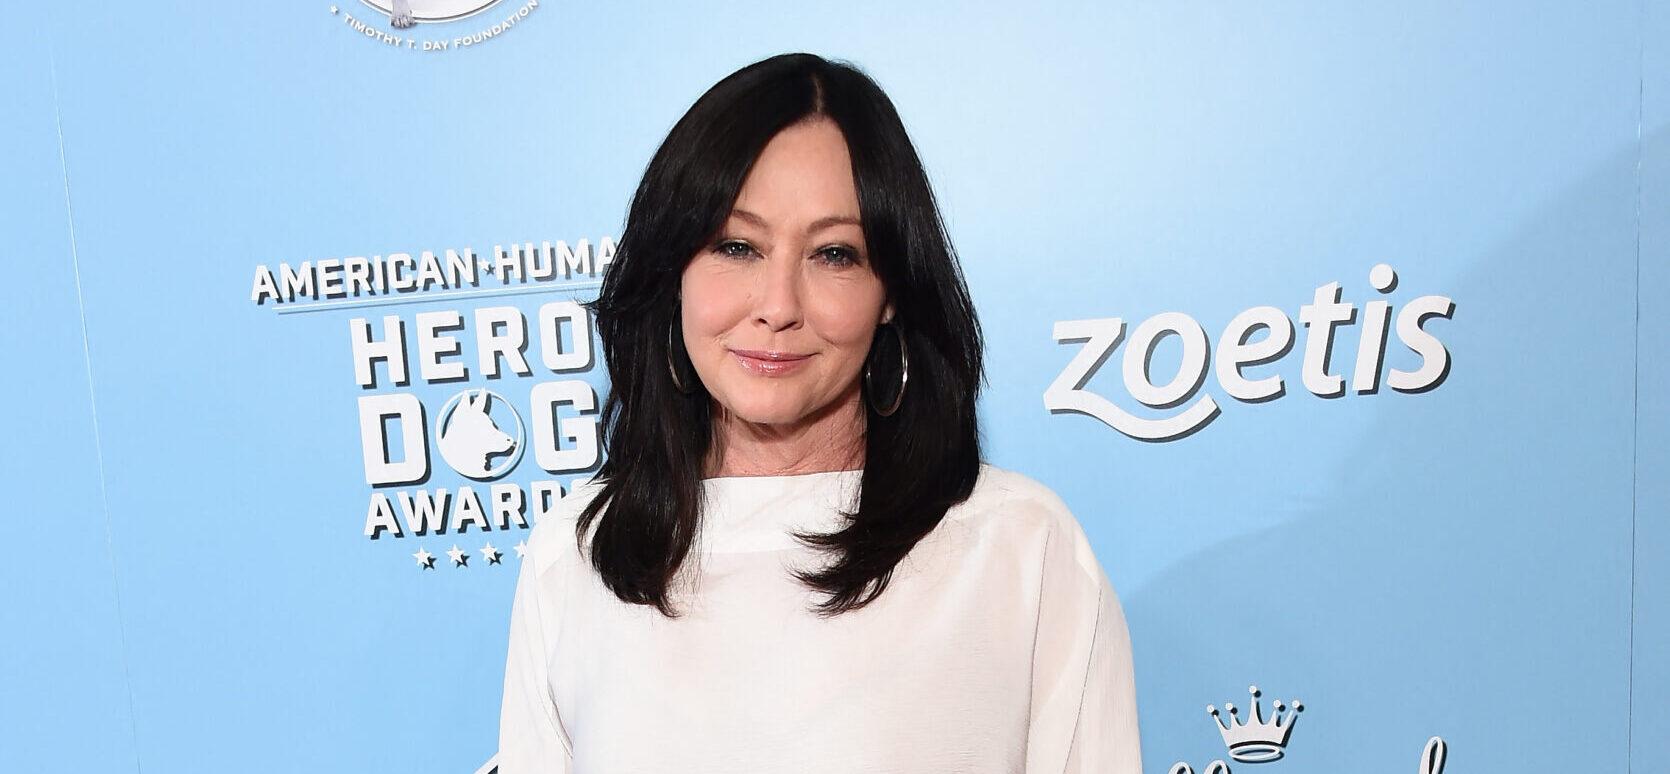 Shannen Doherty at the American Humane Hero Dog Awards